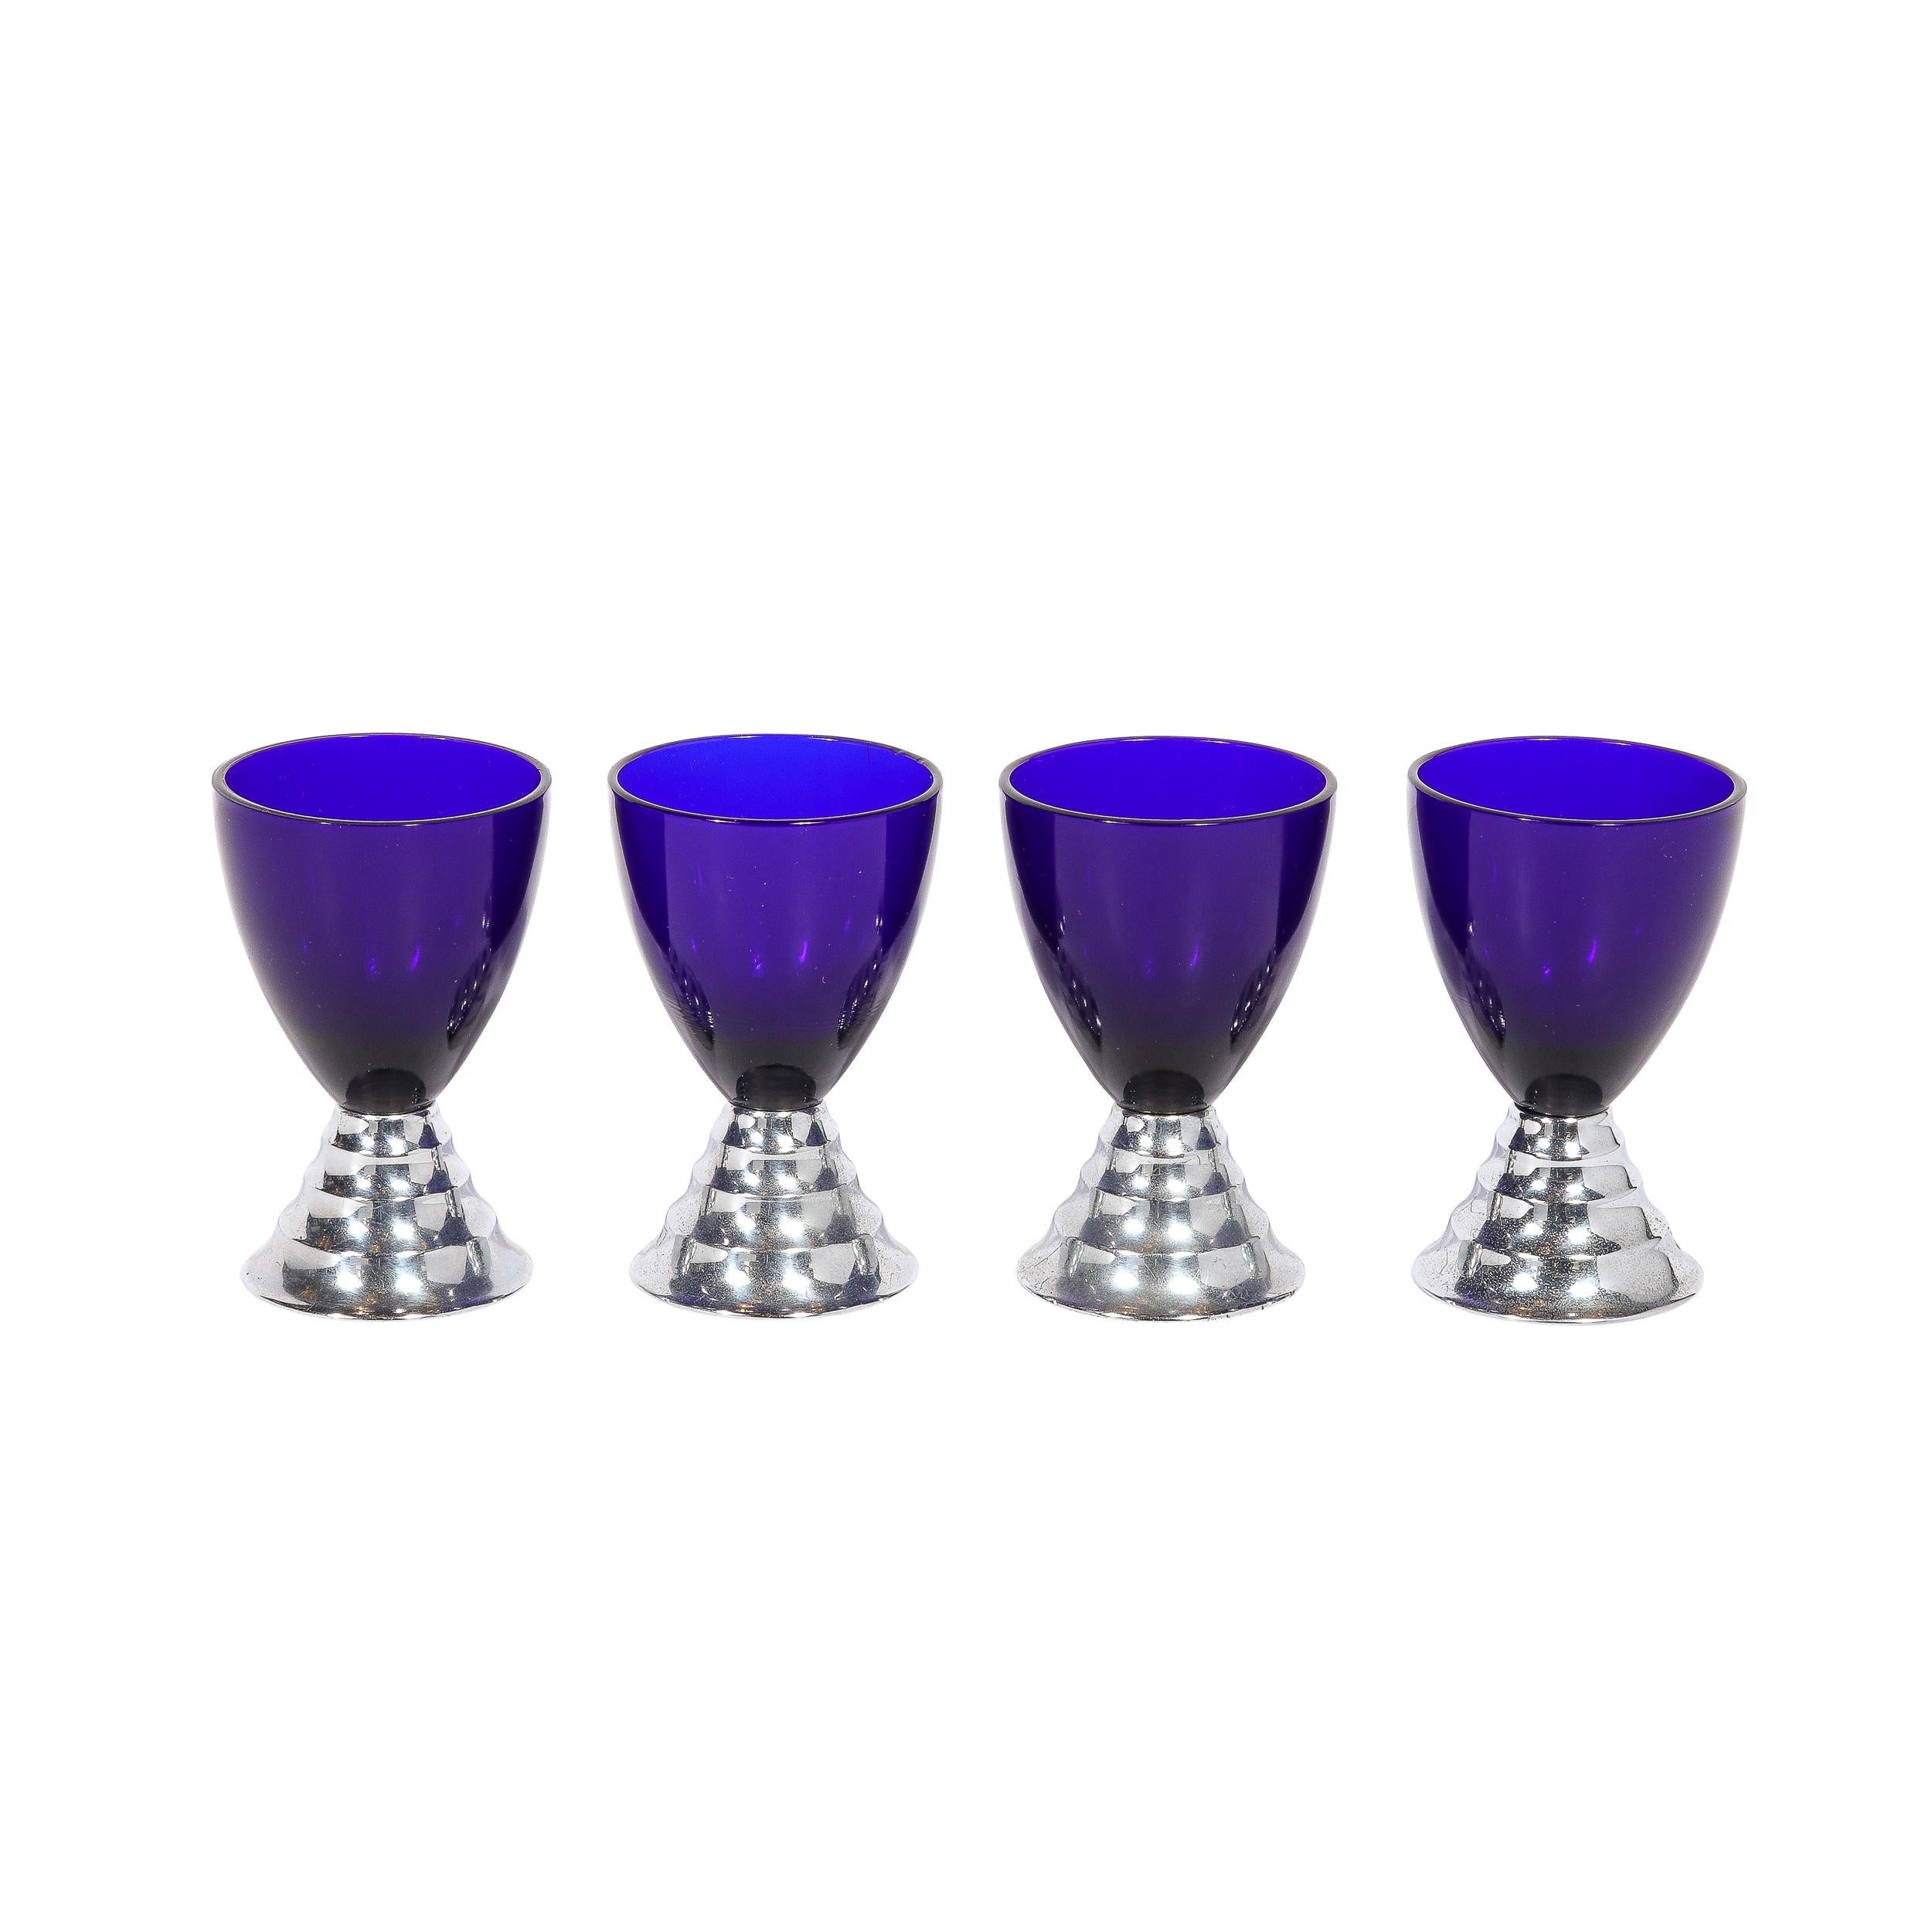 This stunning set of twelve Art Deco cocktail glasses were realized in the United States circa 1930 by the renowned maker Chase. They feature hourglass forms consisting of conical chrome skyscraper style bases featuring circular rings that diminish